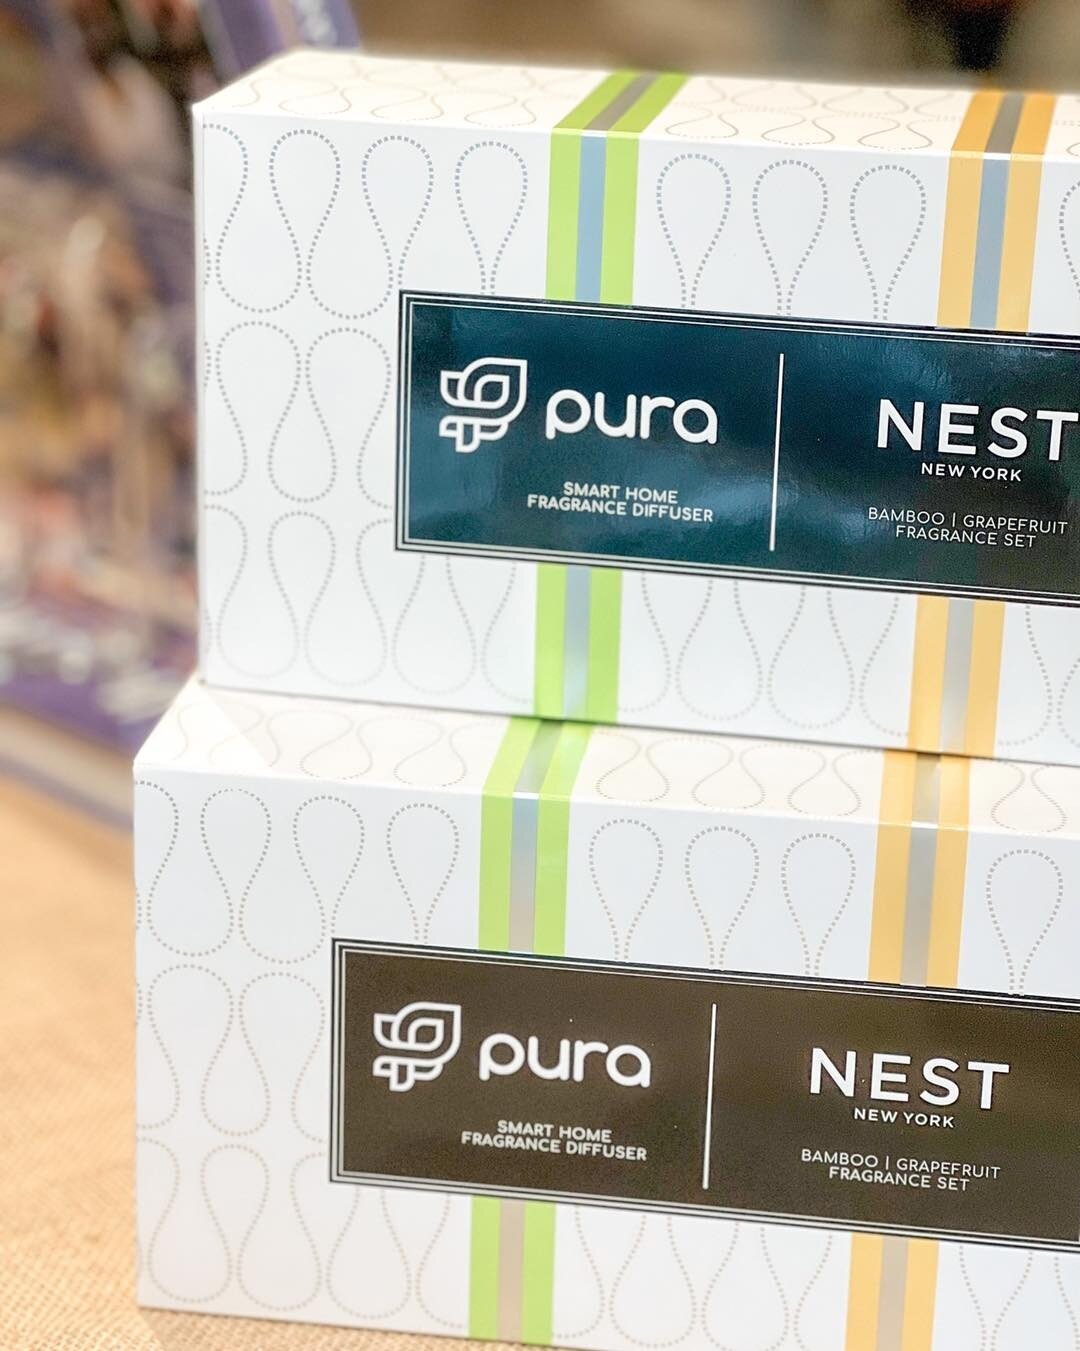 Pura restock🙌🏻 Do you find that the space around you has an impact on your mood? Now that our Christmas decorations are cleared out, we are ready for our spaces to be clean and fresh!